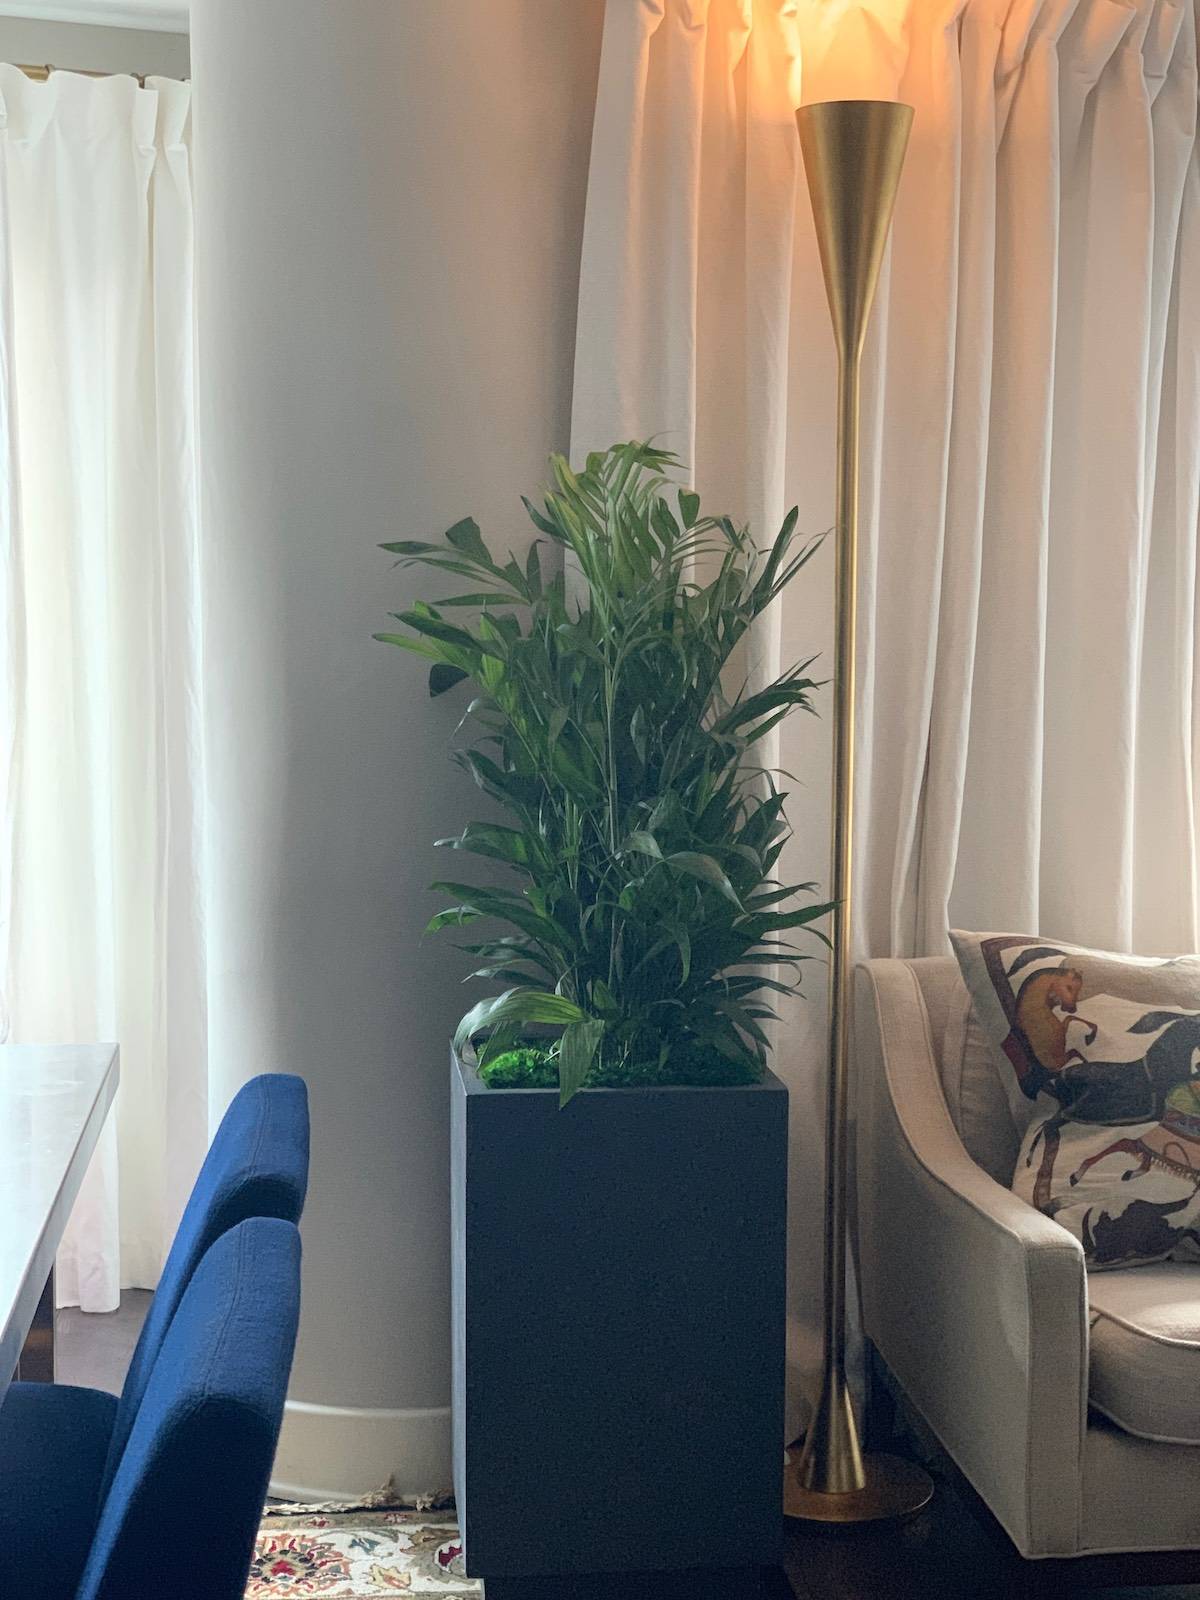 Bamboo Palm Finds a Home in Midwest